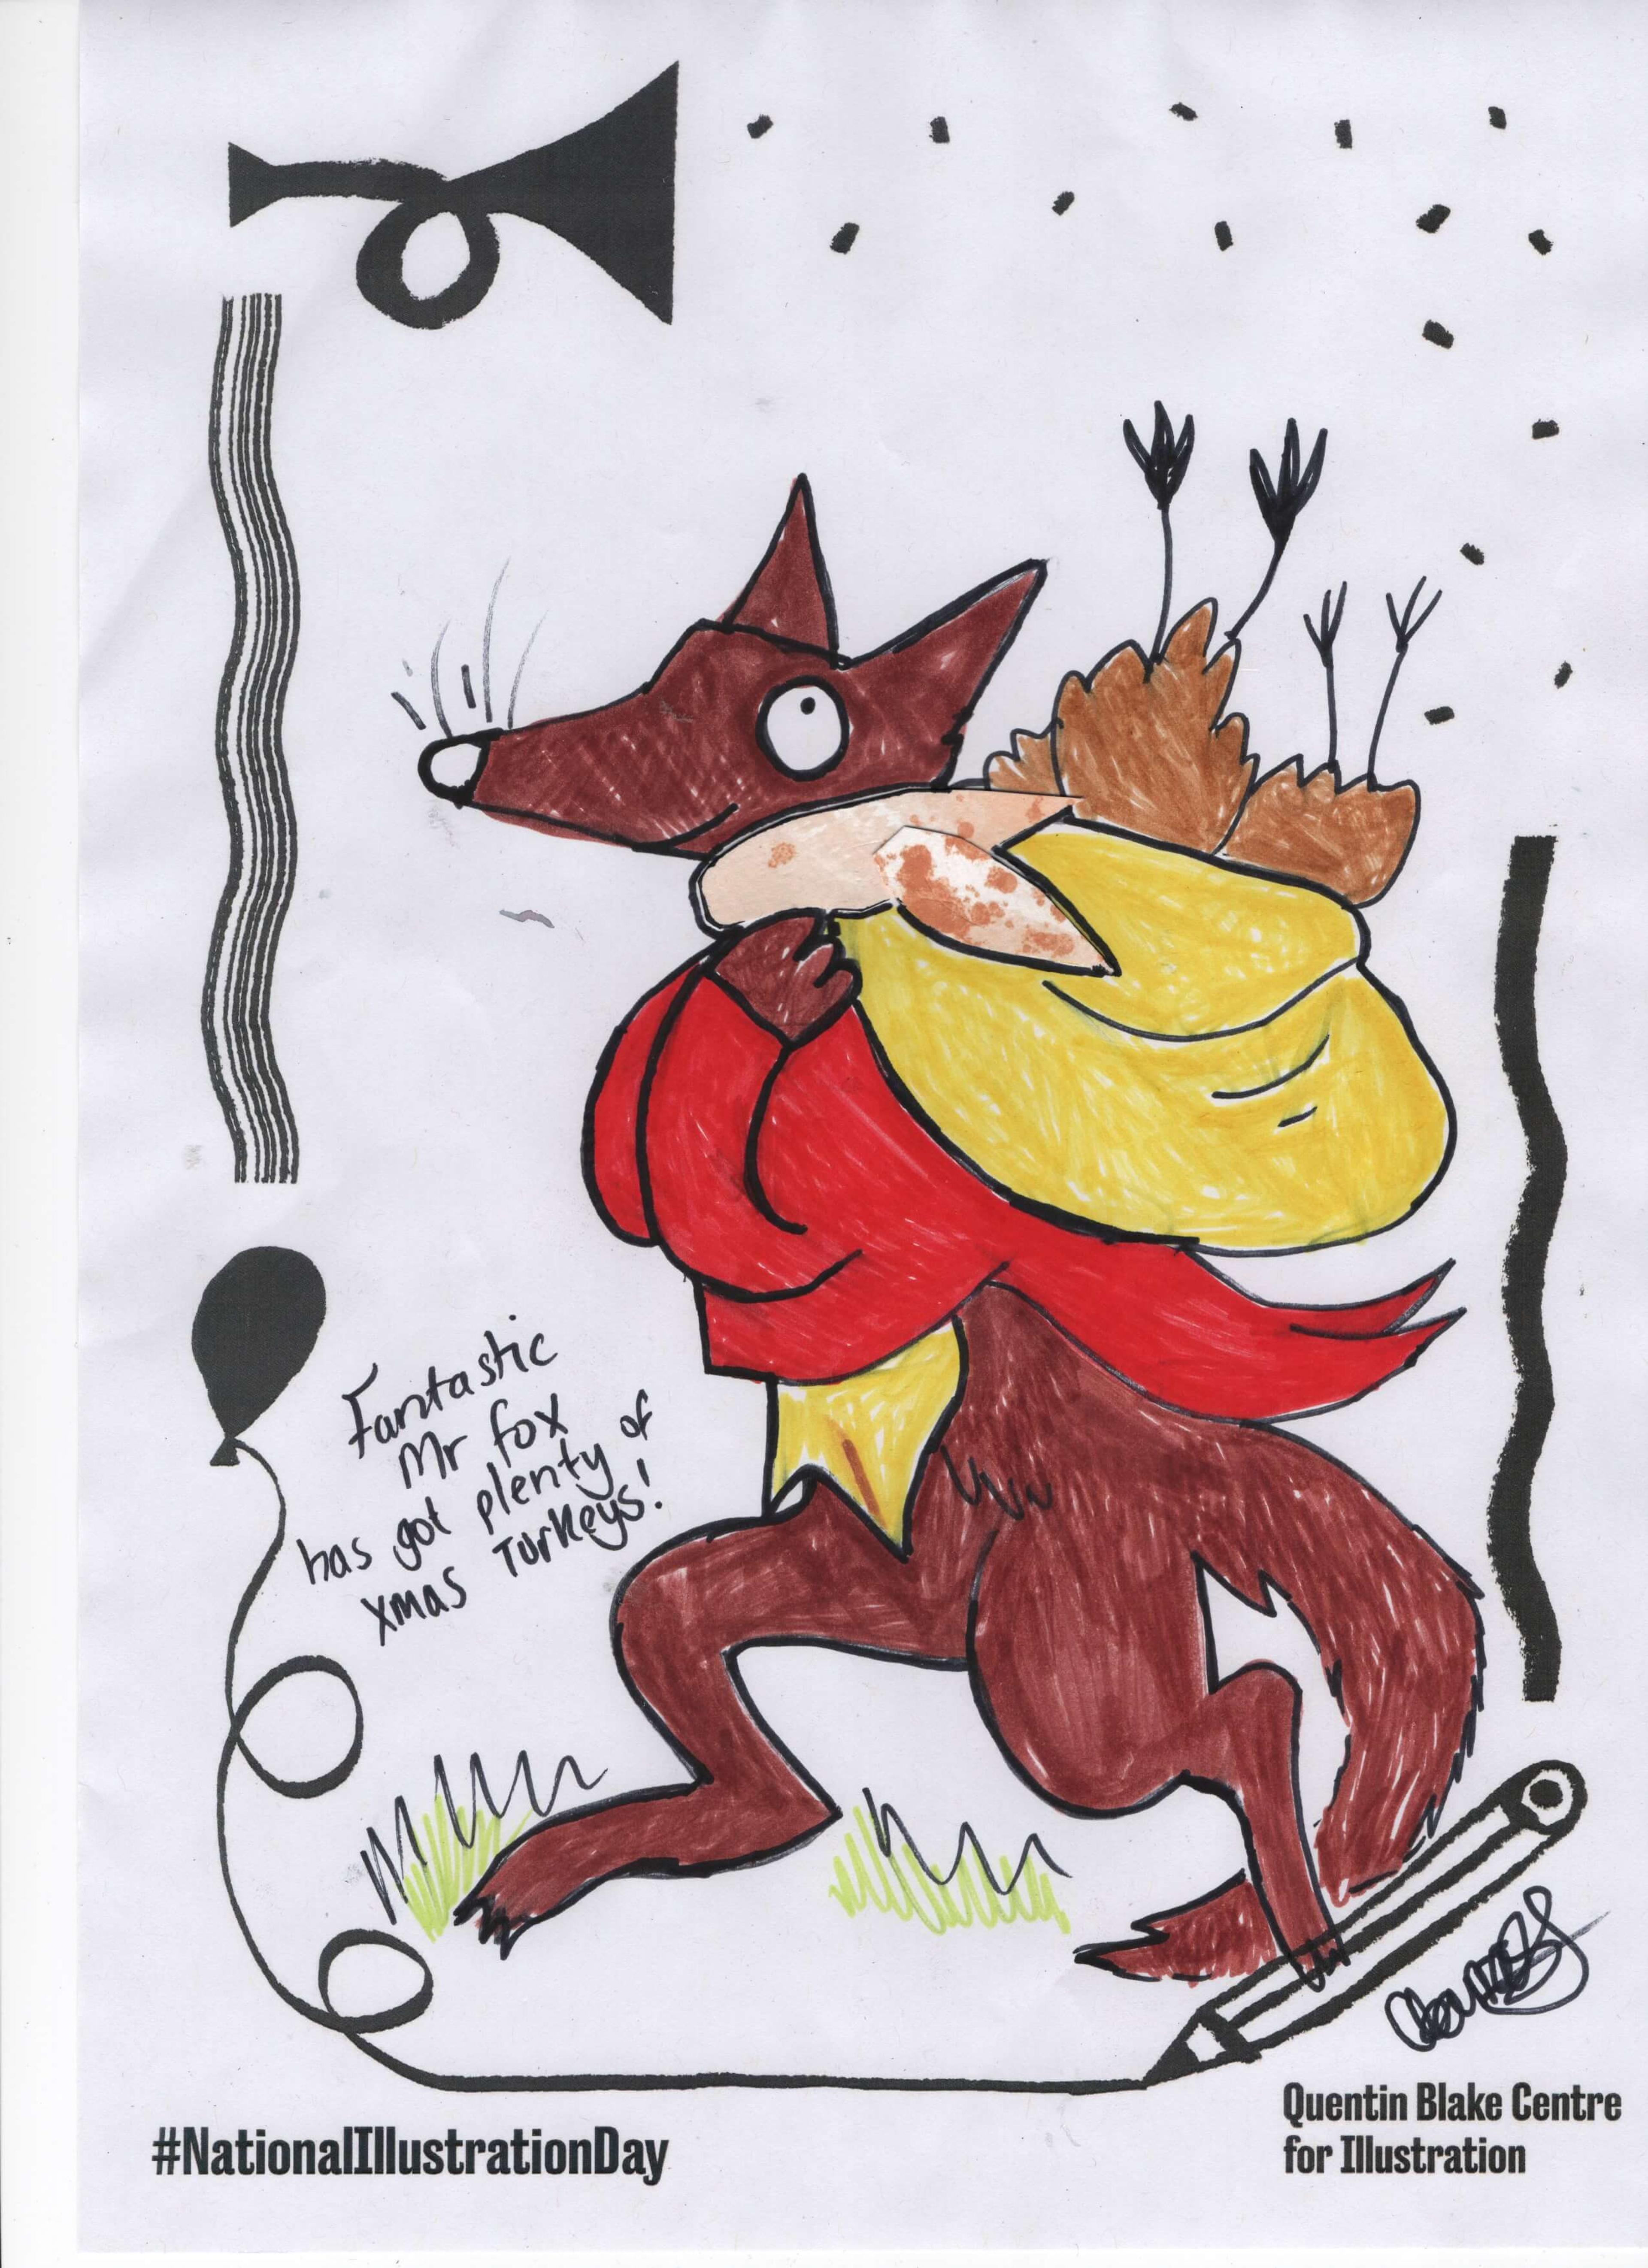 Cartoon of a smiling fox holding a sack with visible poultry legs sticking out. The drawing includes the text "Fantastic Mr Fox has got plenty of Xmas turkeys!" 